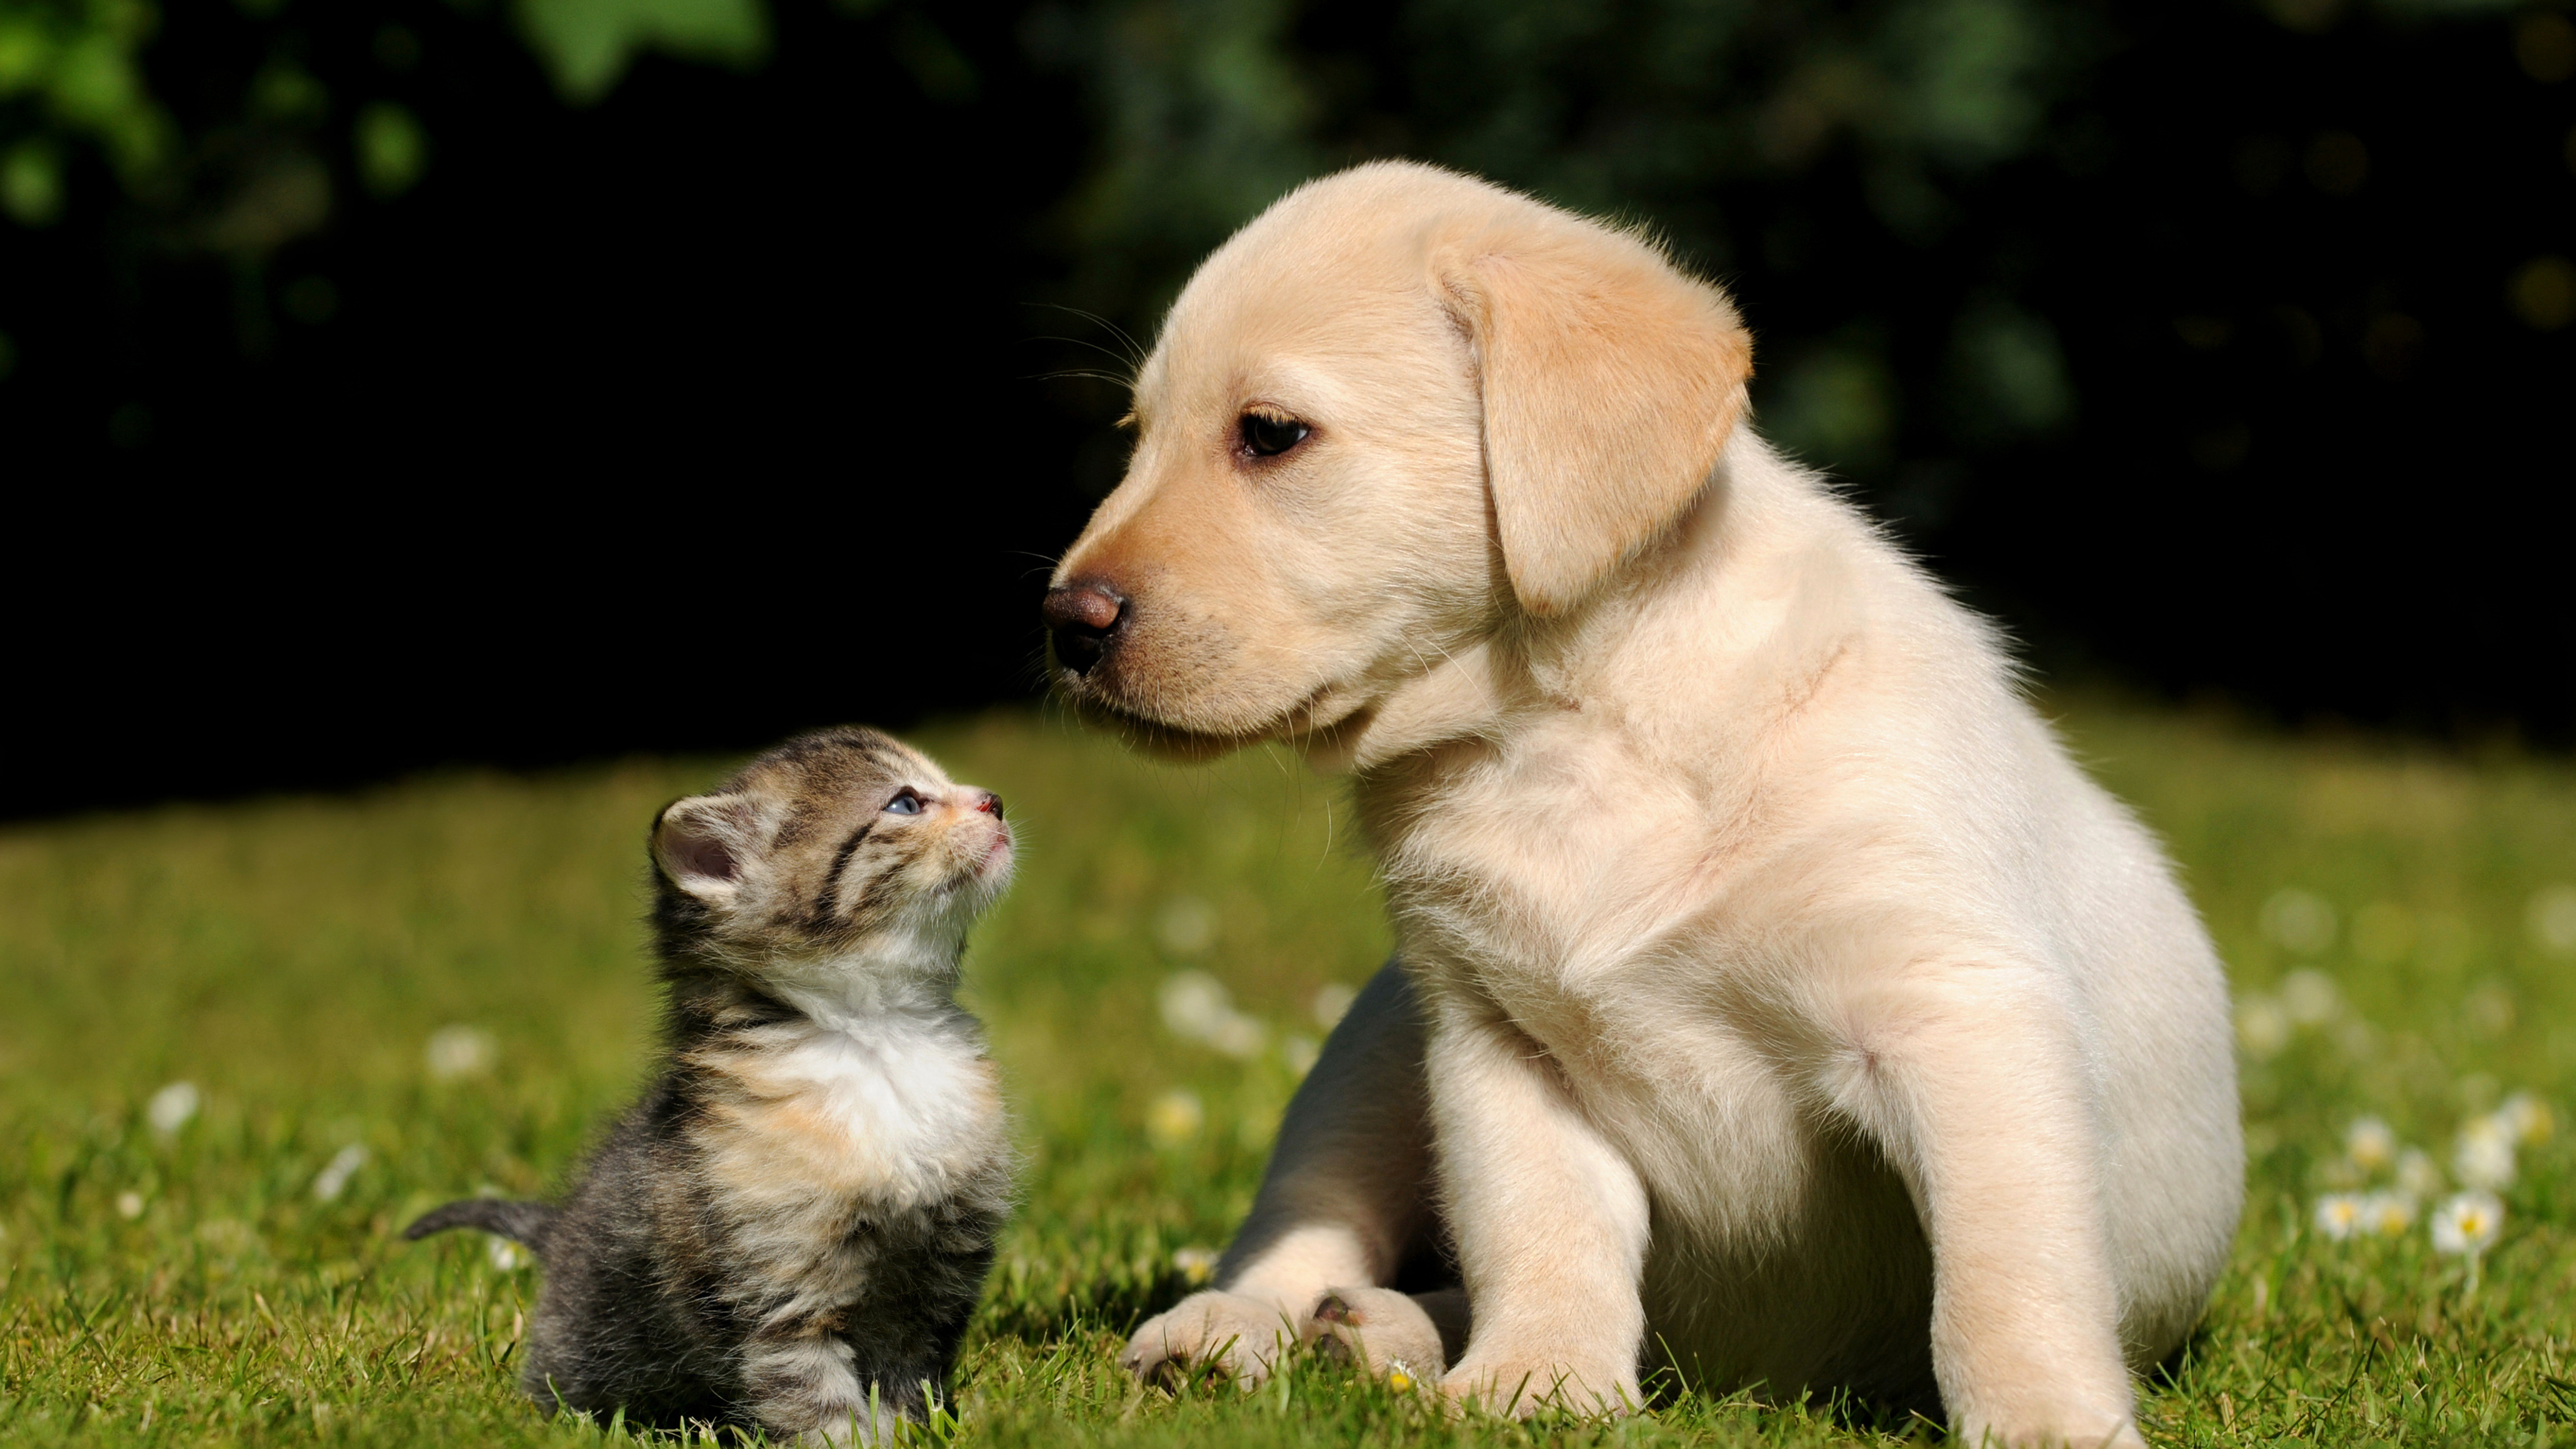 Wallpaper Friends, cat, dog, puppy, kitty, green, grass, sunny day, cute,  pet, Animals #721 - Page 2